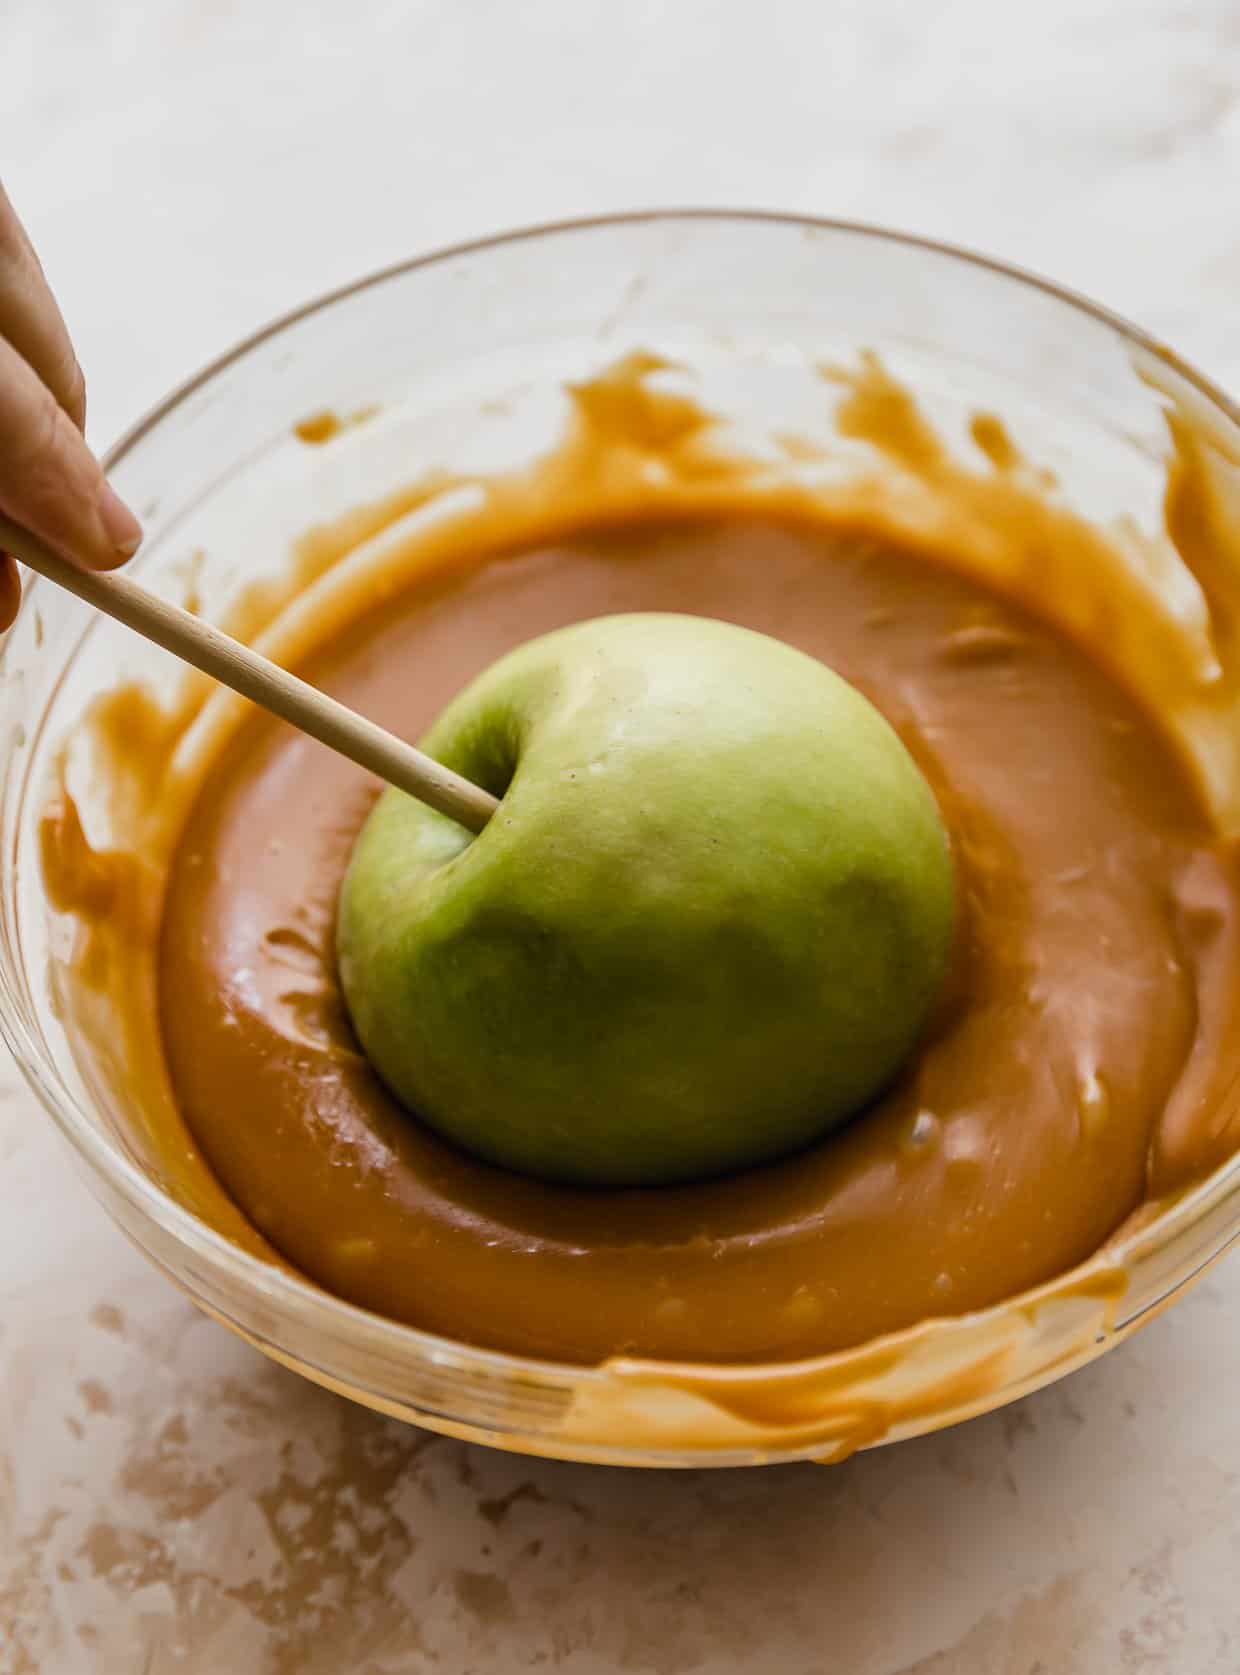 A green Granny Smith apple being dunked in caramel.